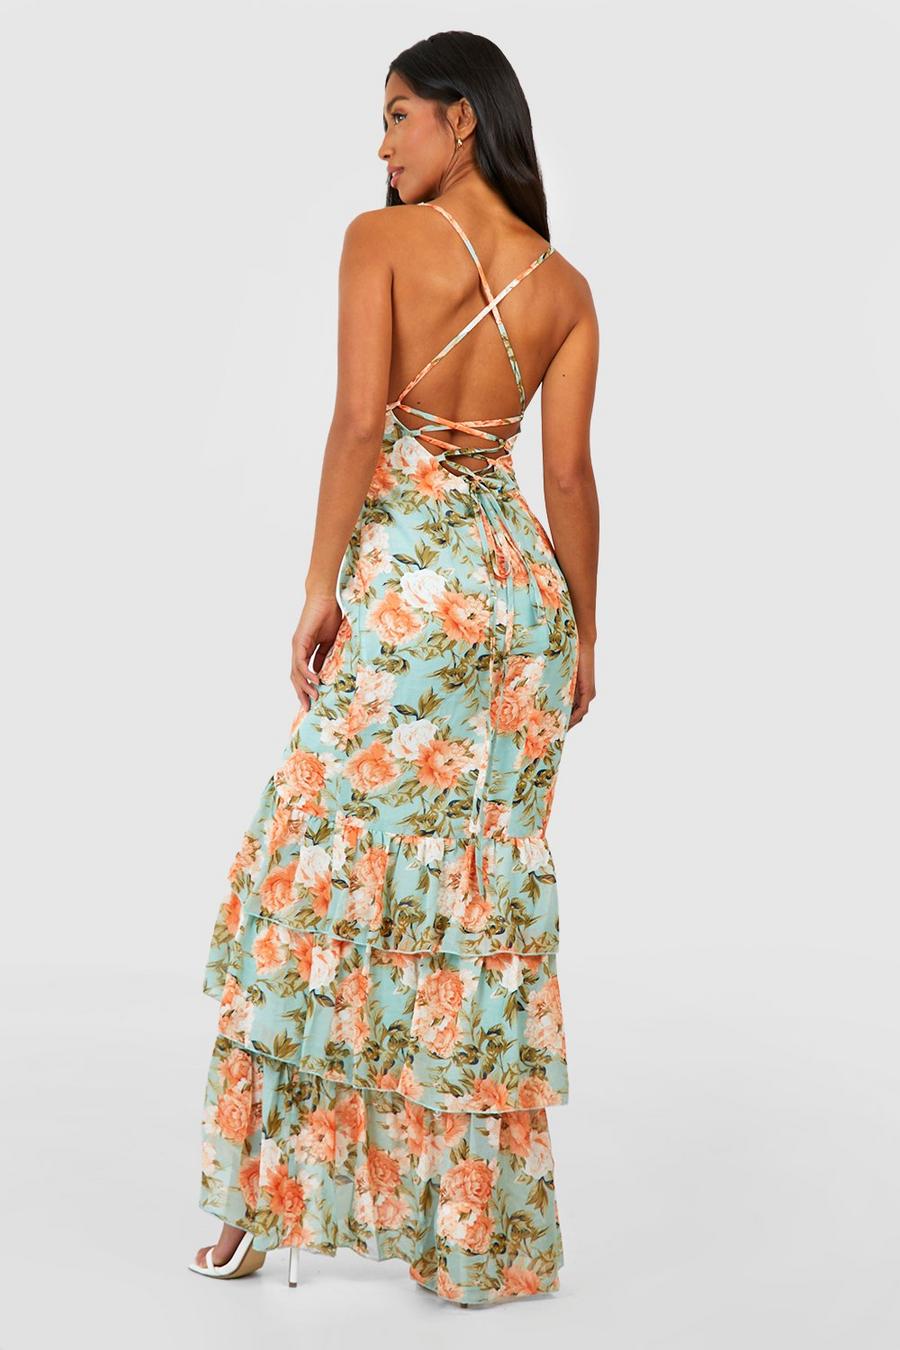 Petite Bold Floral Cap Sleeve Backless Top